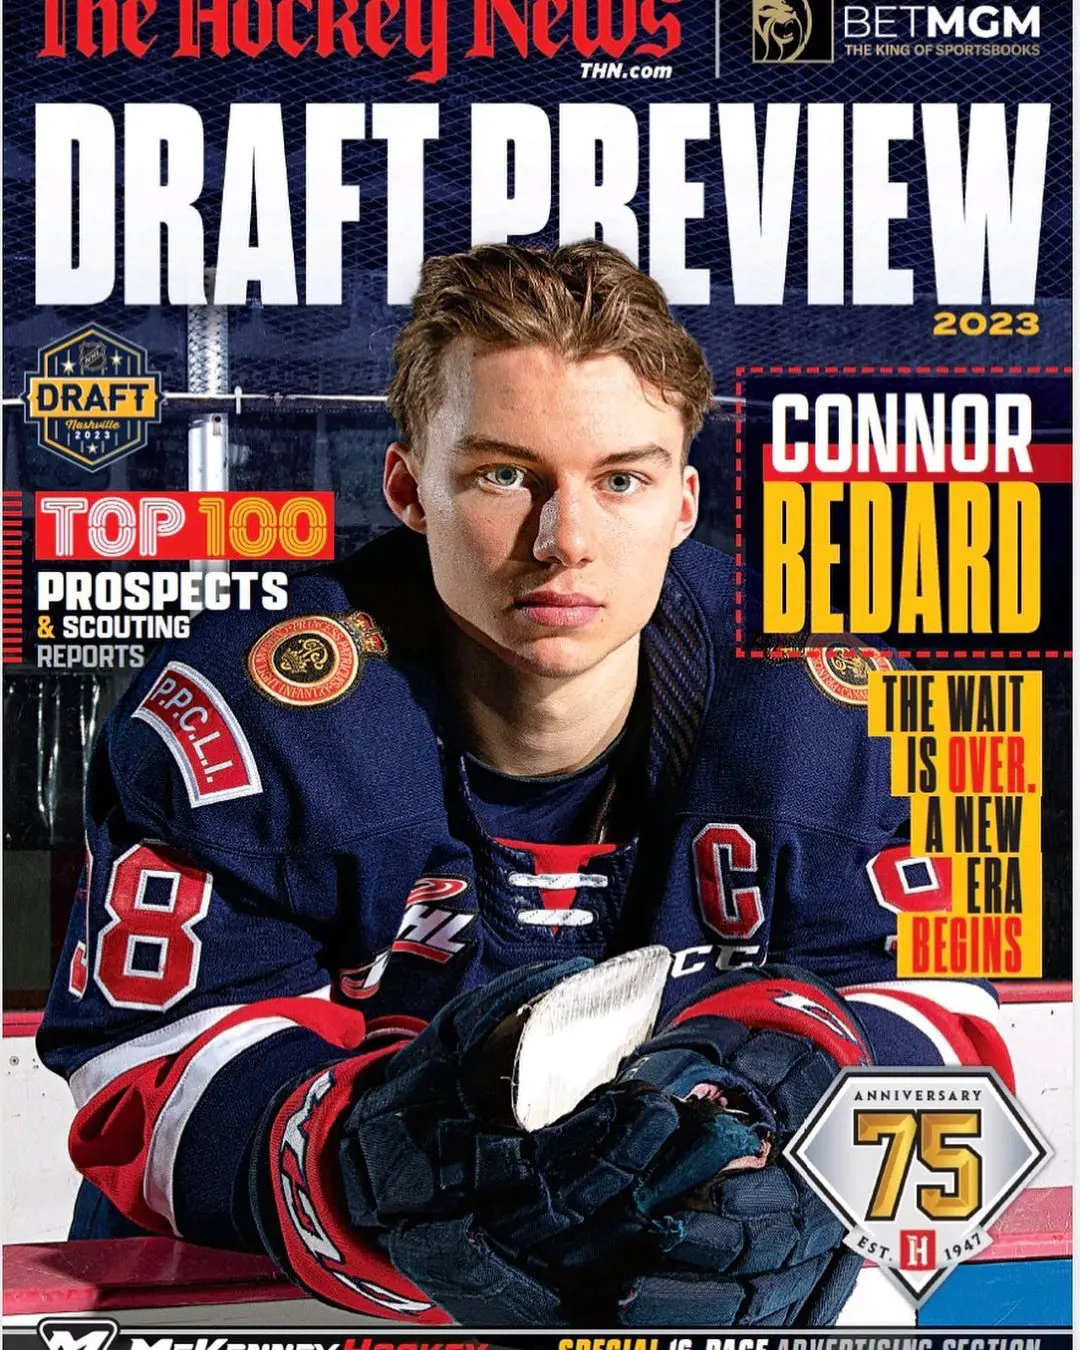 Bedard featured in the Draft Preview issue of The Hockey News on June 2023.